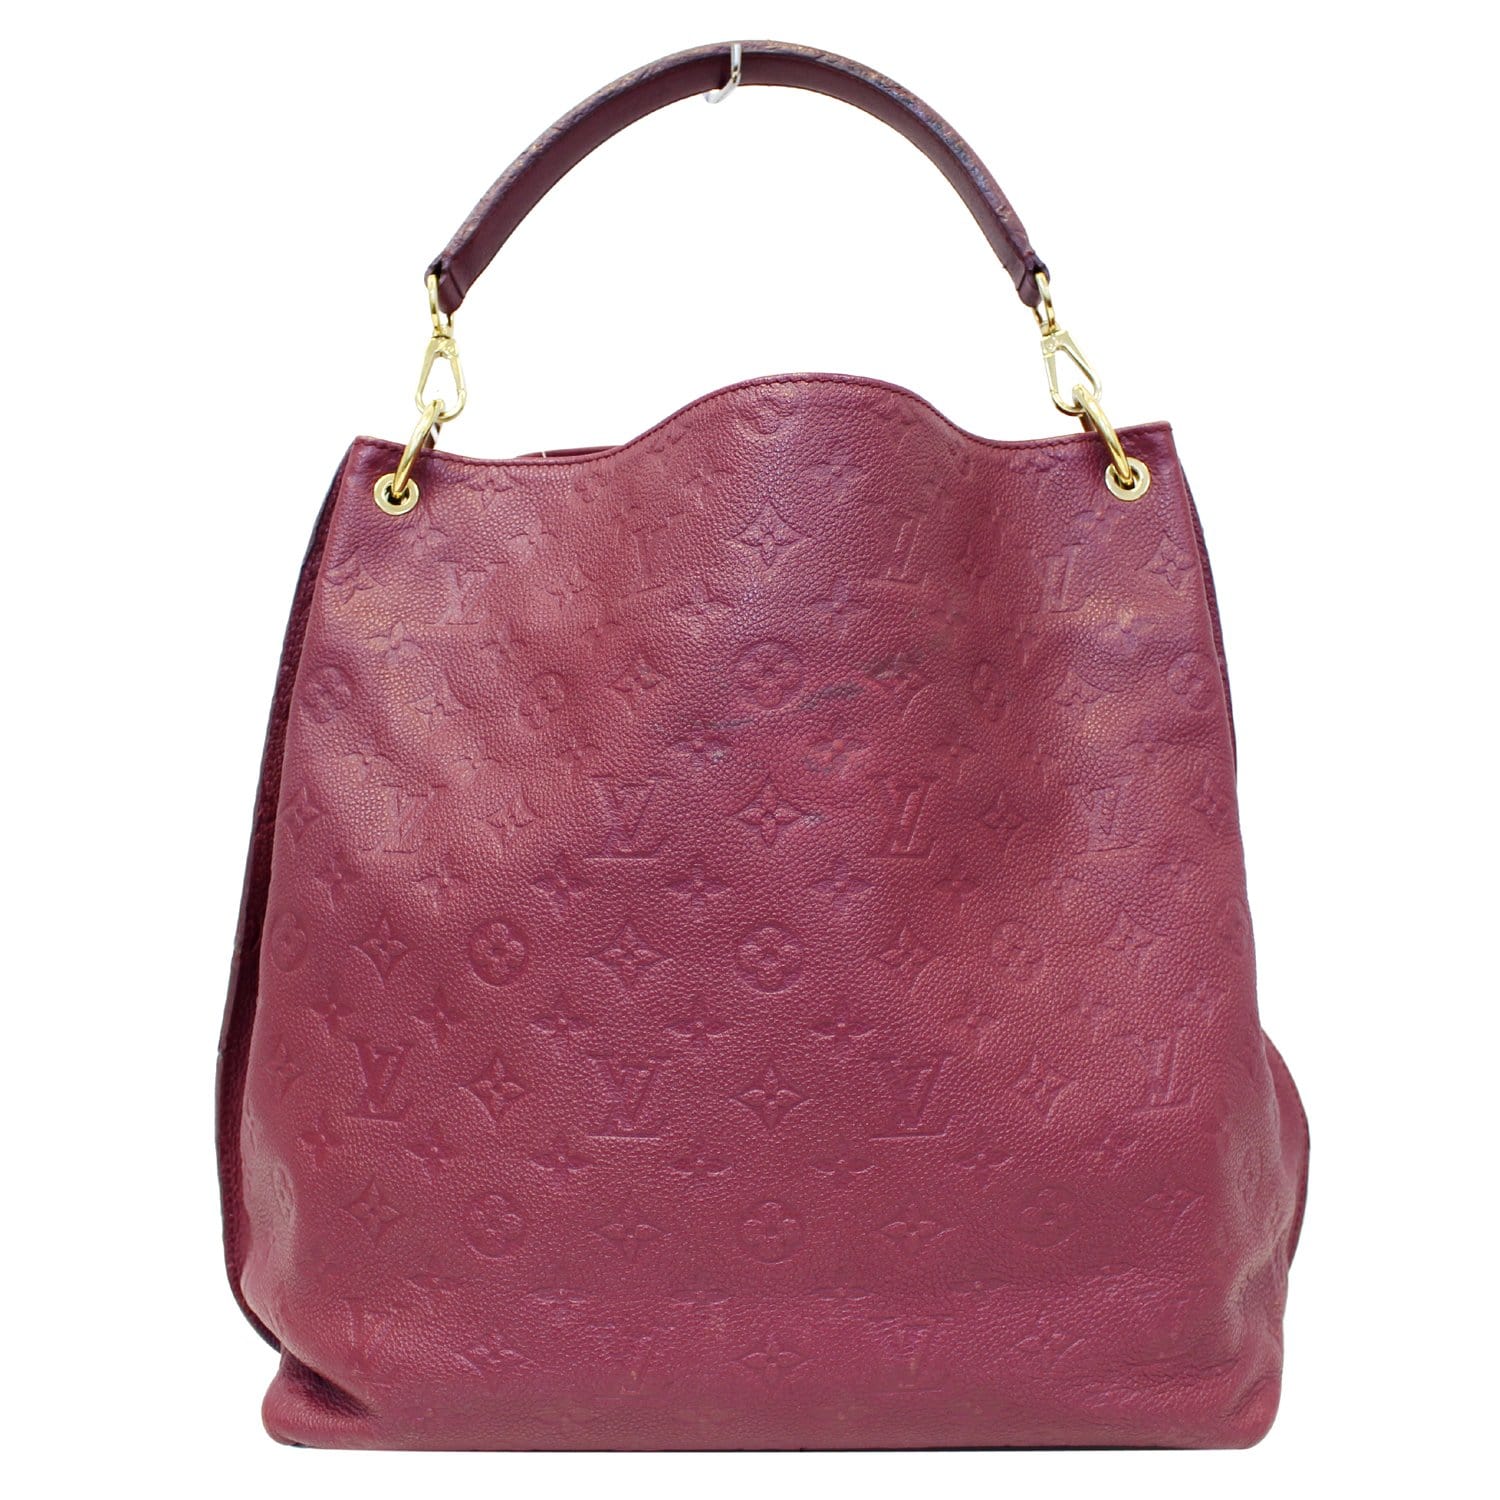 Louis Vuitton - Authenticated Metis Handbag - Leather Purple for Women, Very Good Condition